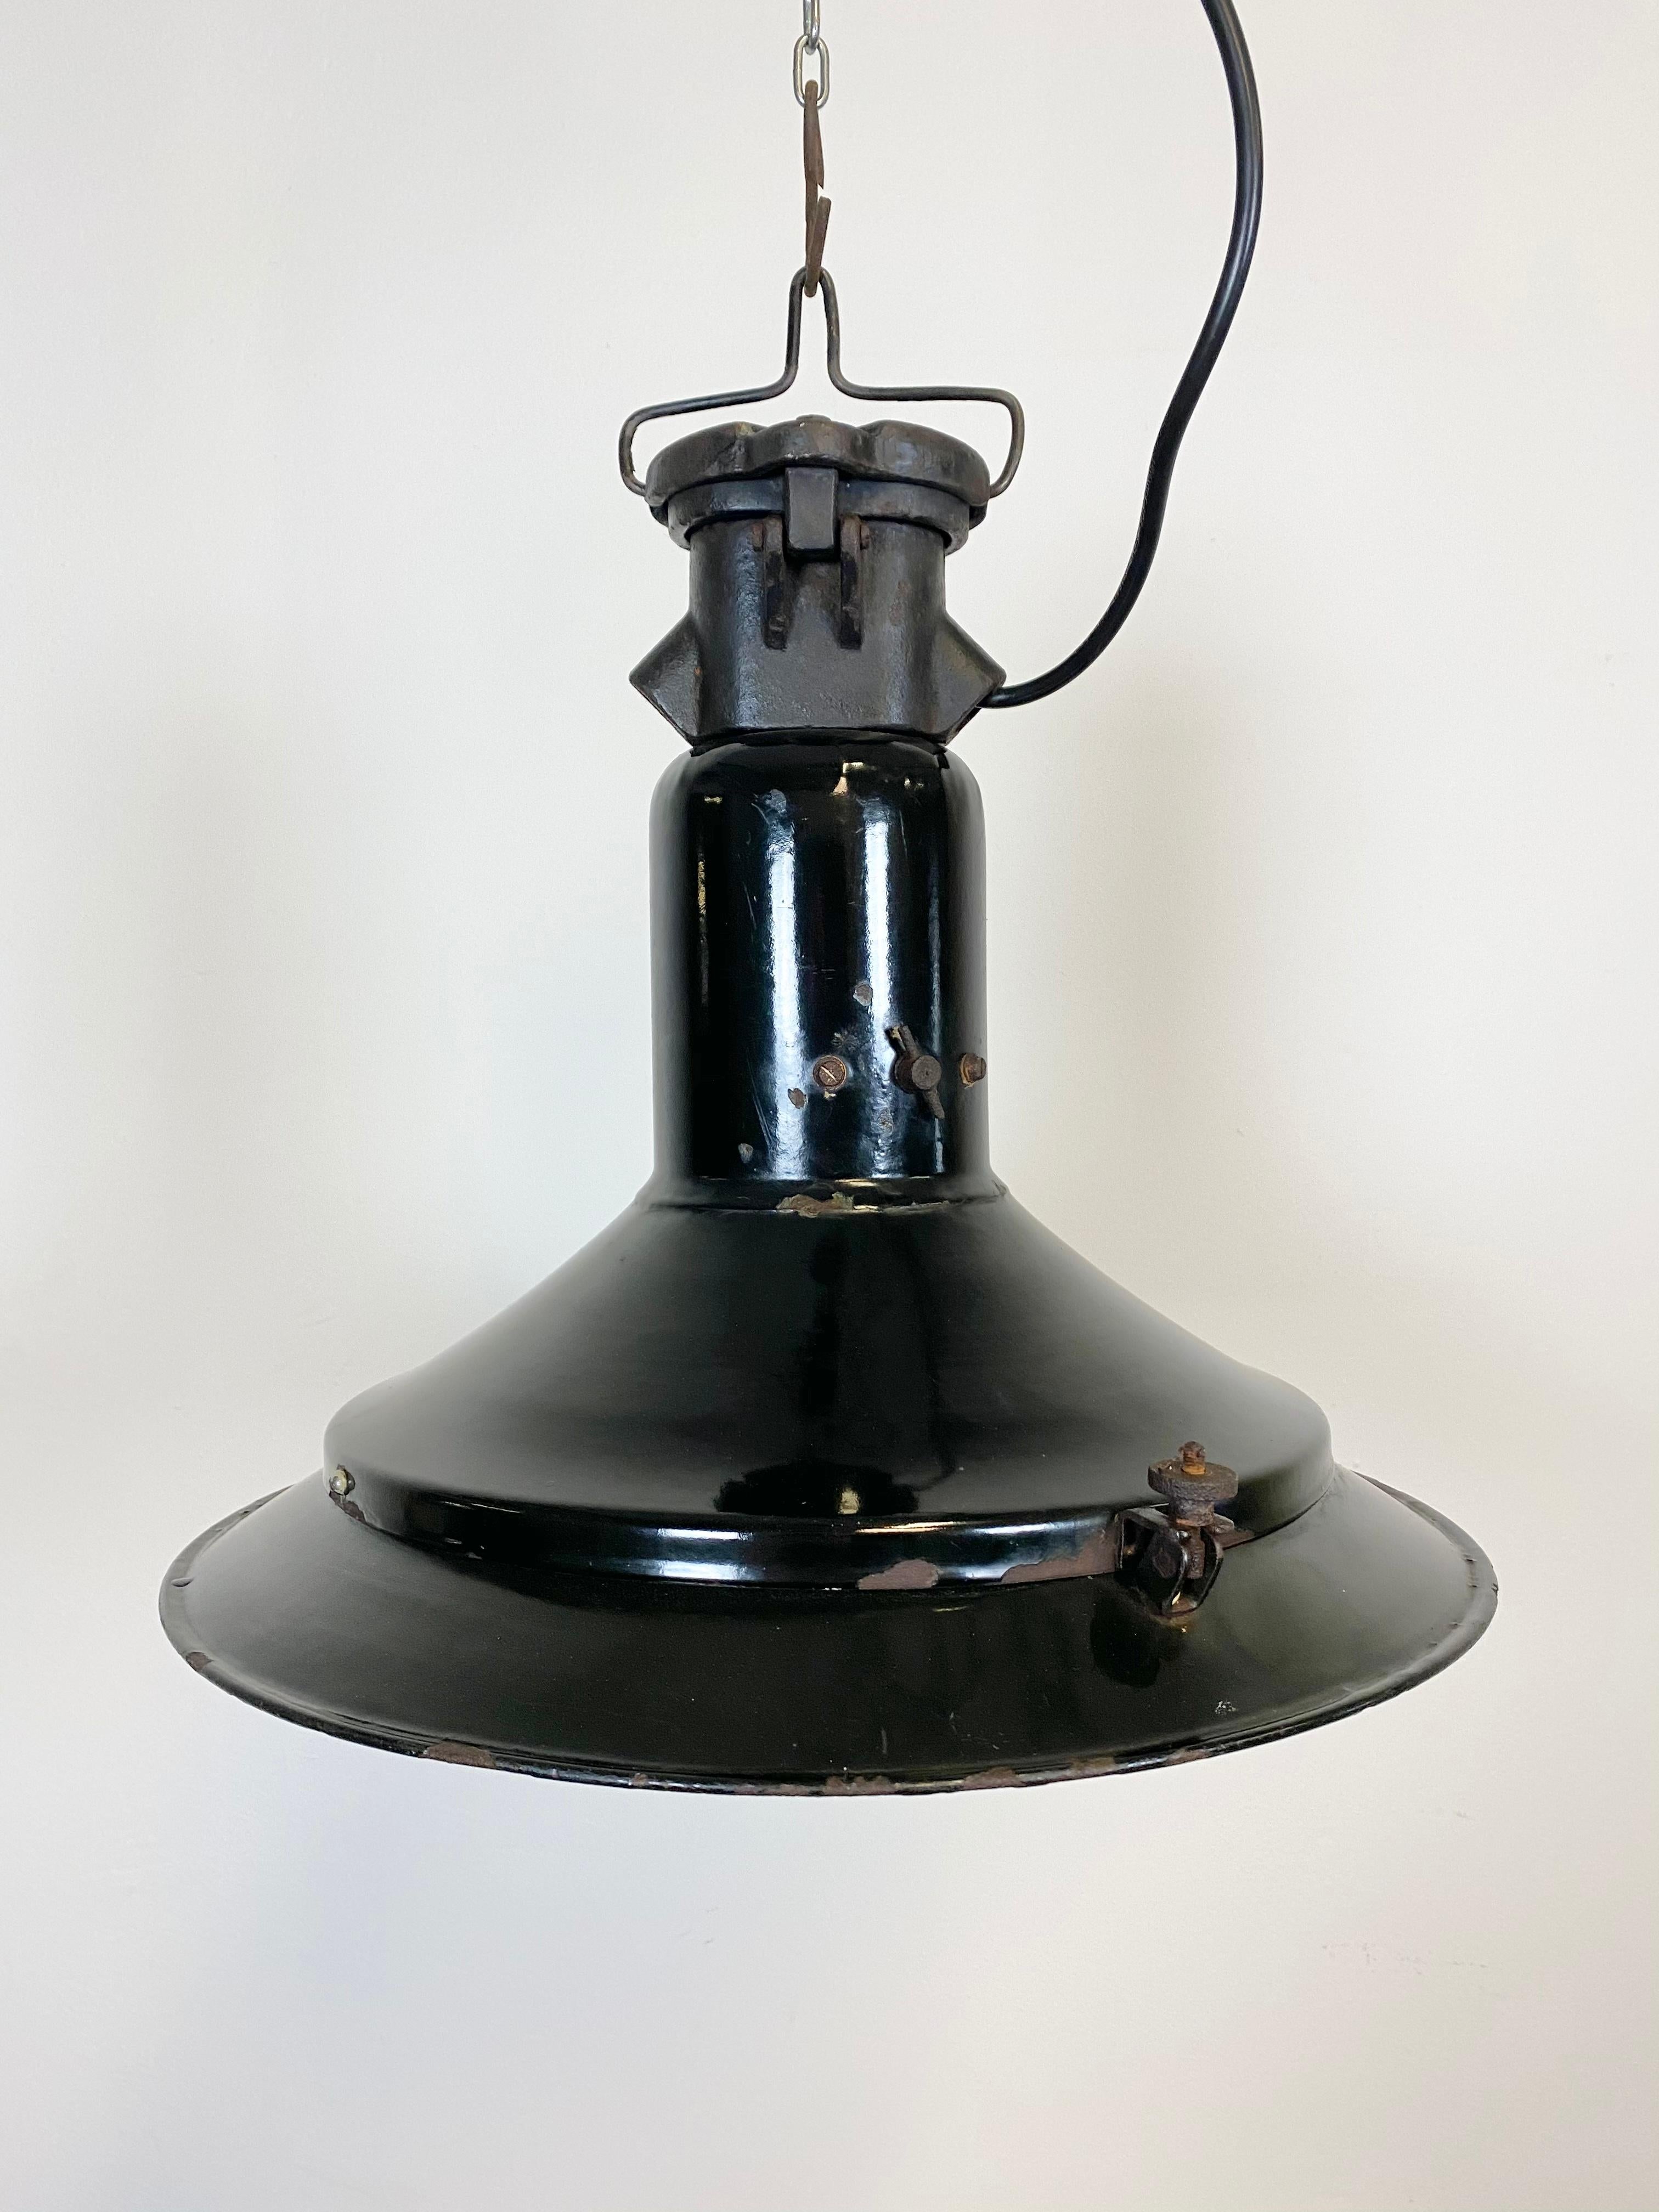 Very old Industrial light made during the 1920s. It features a black enamel exterior, white enamel interior and cast iron top. New porcelain socket for E 27 lightbulbs and wire. Weight : 5 kg.